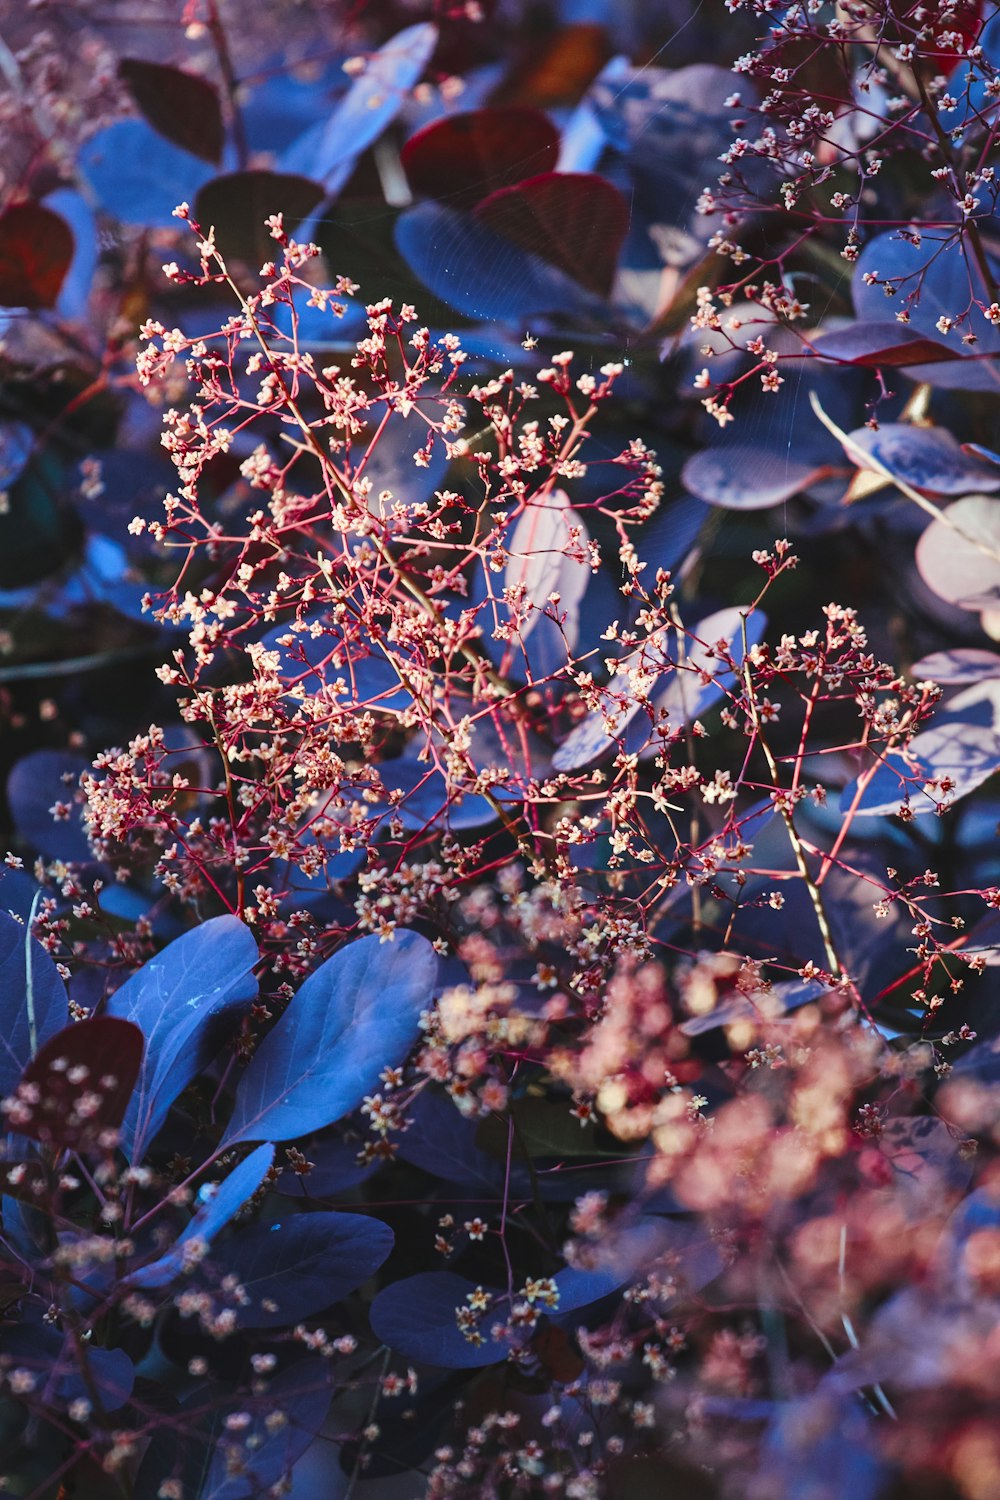 a close up of a bush with purple flowers